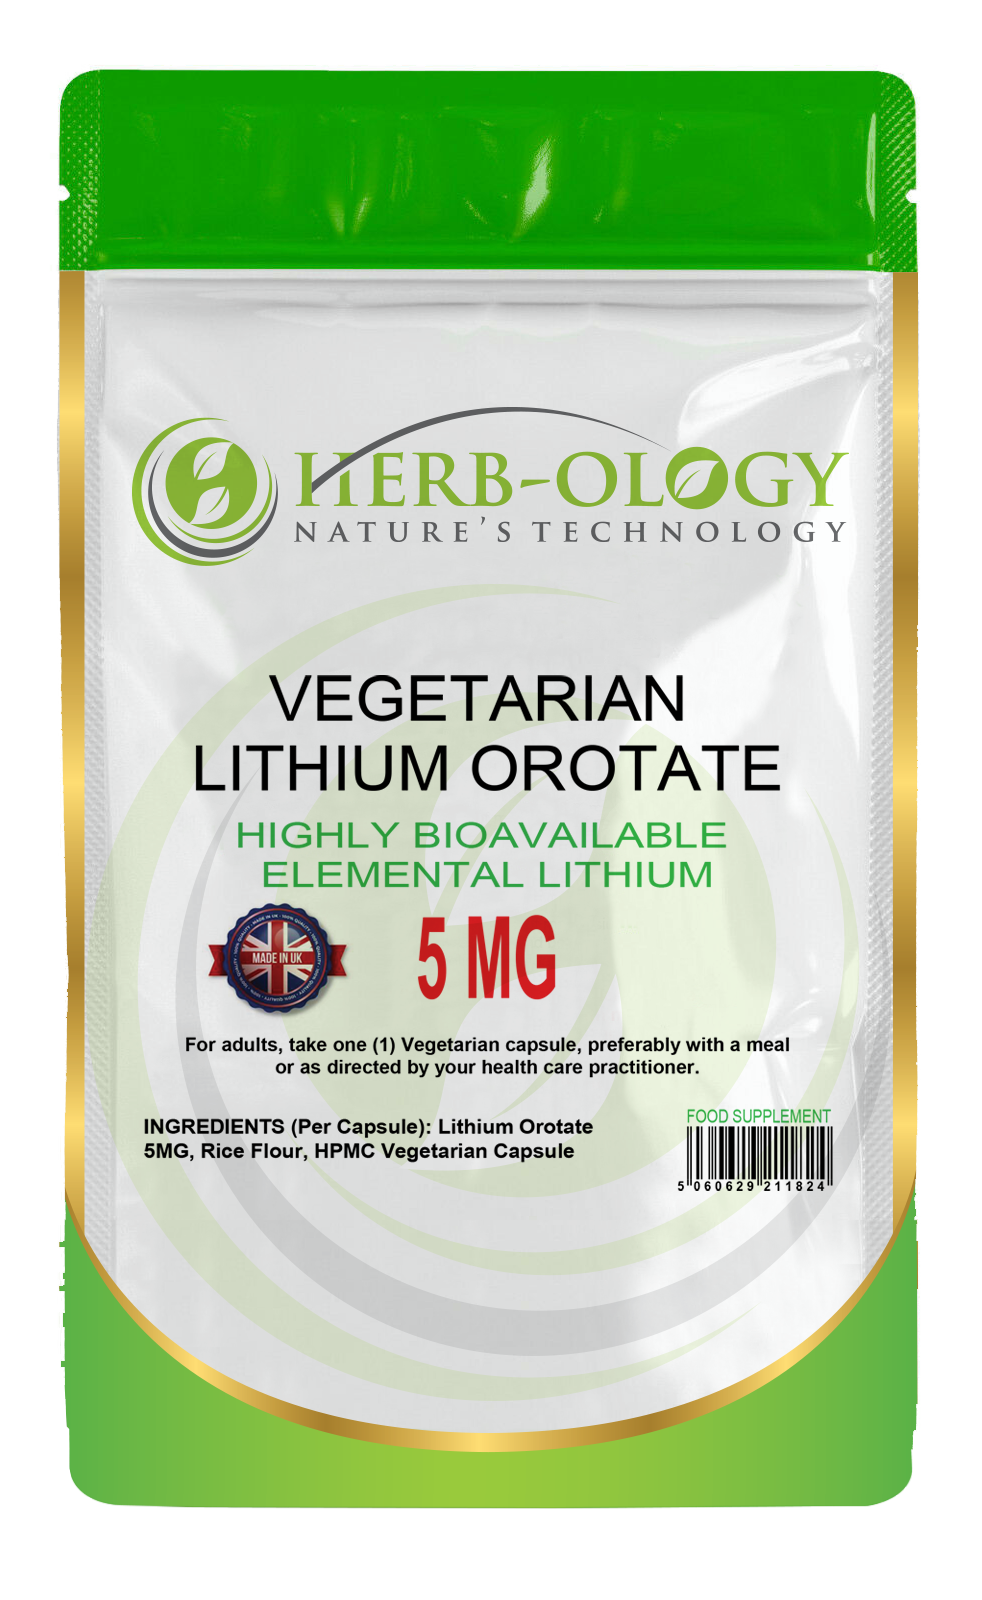 Lithium Orotate 5mg / 10mg Vegan Capsules For Mood Support